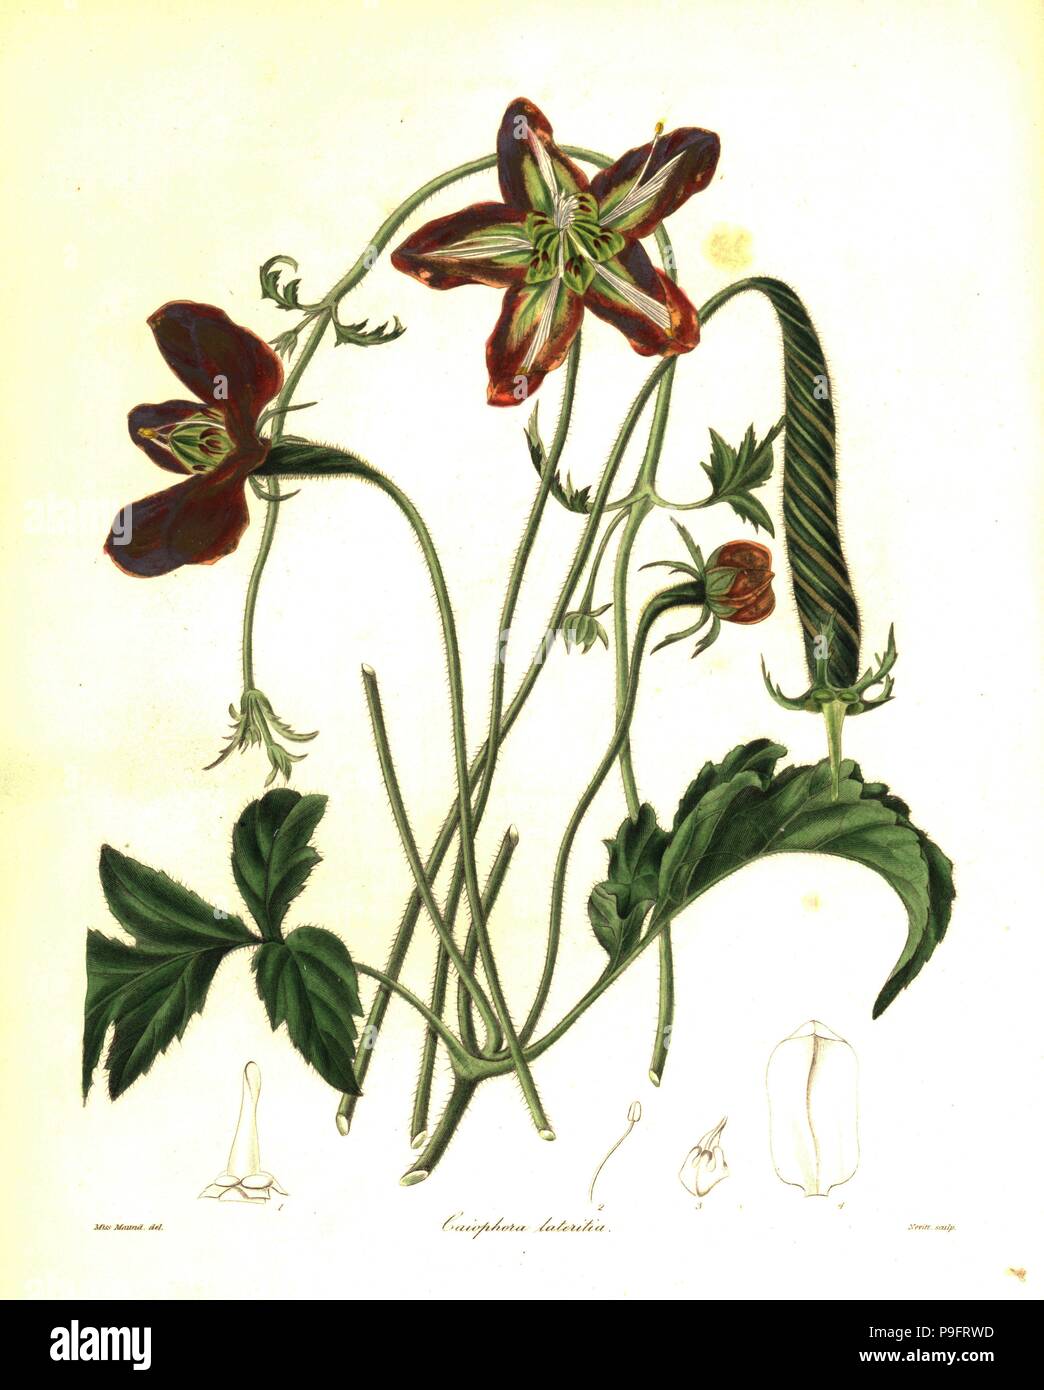 Brick-red caiophora, Caiophora lateritia. Handcoloured copperplate engraving by S. Nevitt after a botanical illustration by Miss Maund from Benjamin Maund and the Rev. John Stevens Henslow's The Botanist, London, 1836. Stock Photo